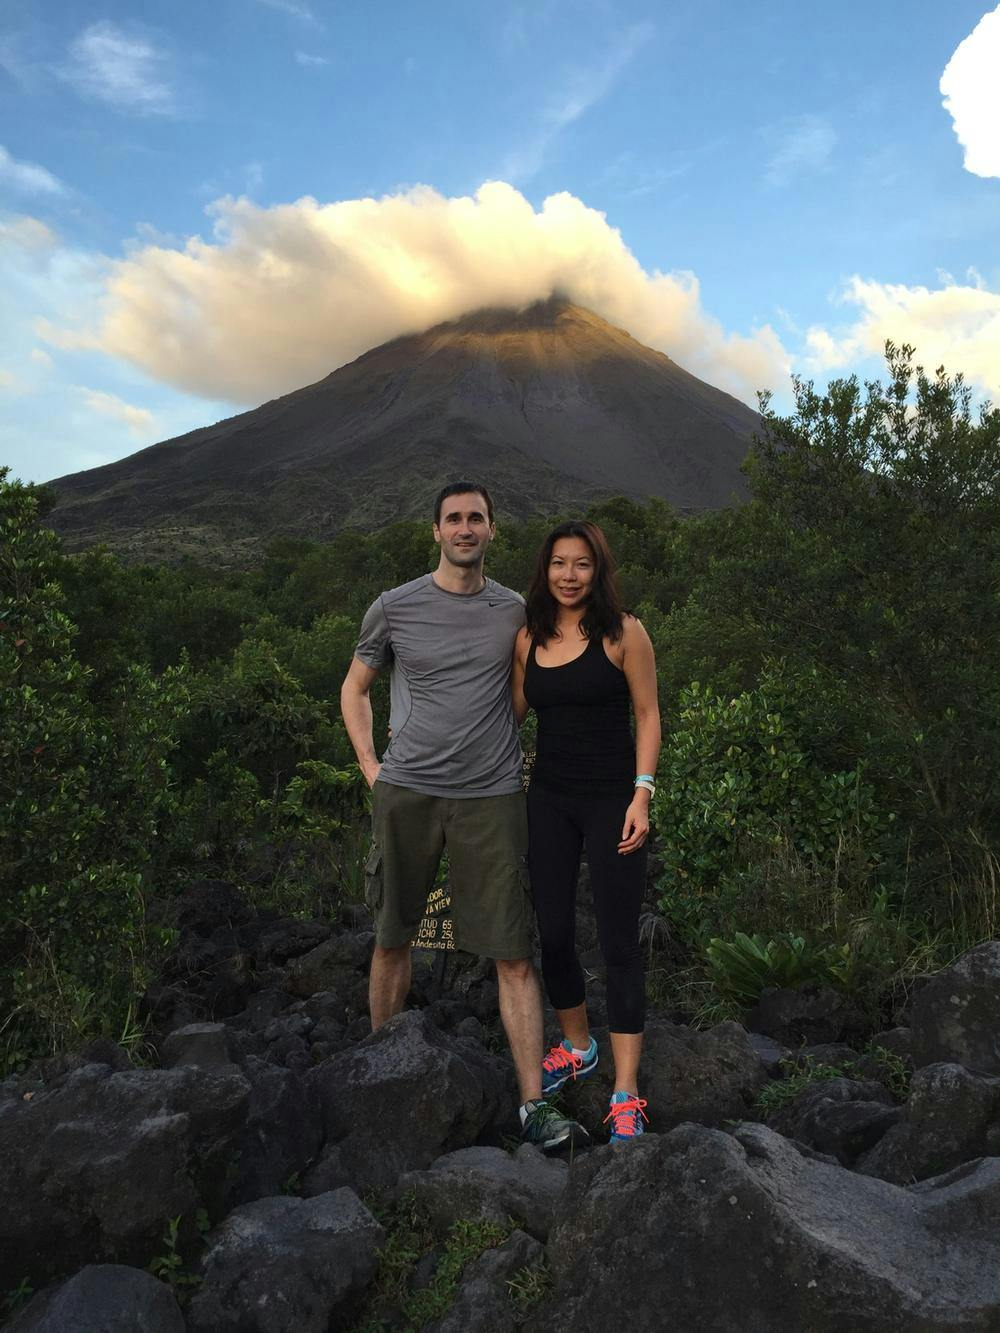 Robert and his partner standing in front of a volcano in athletic gear